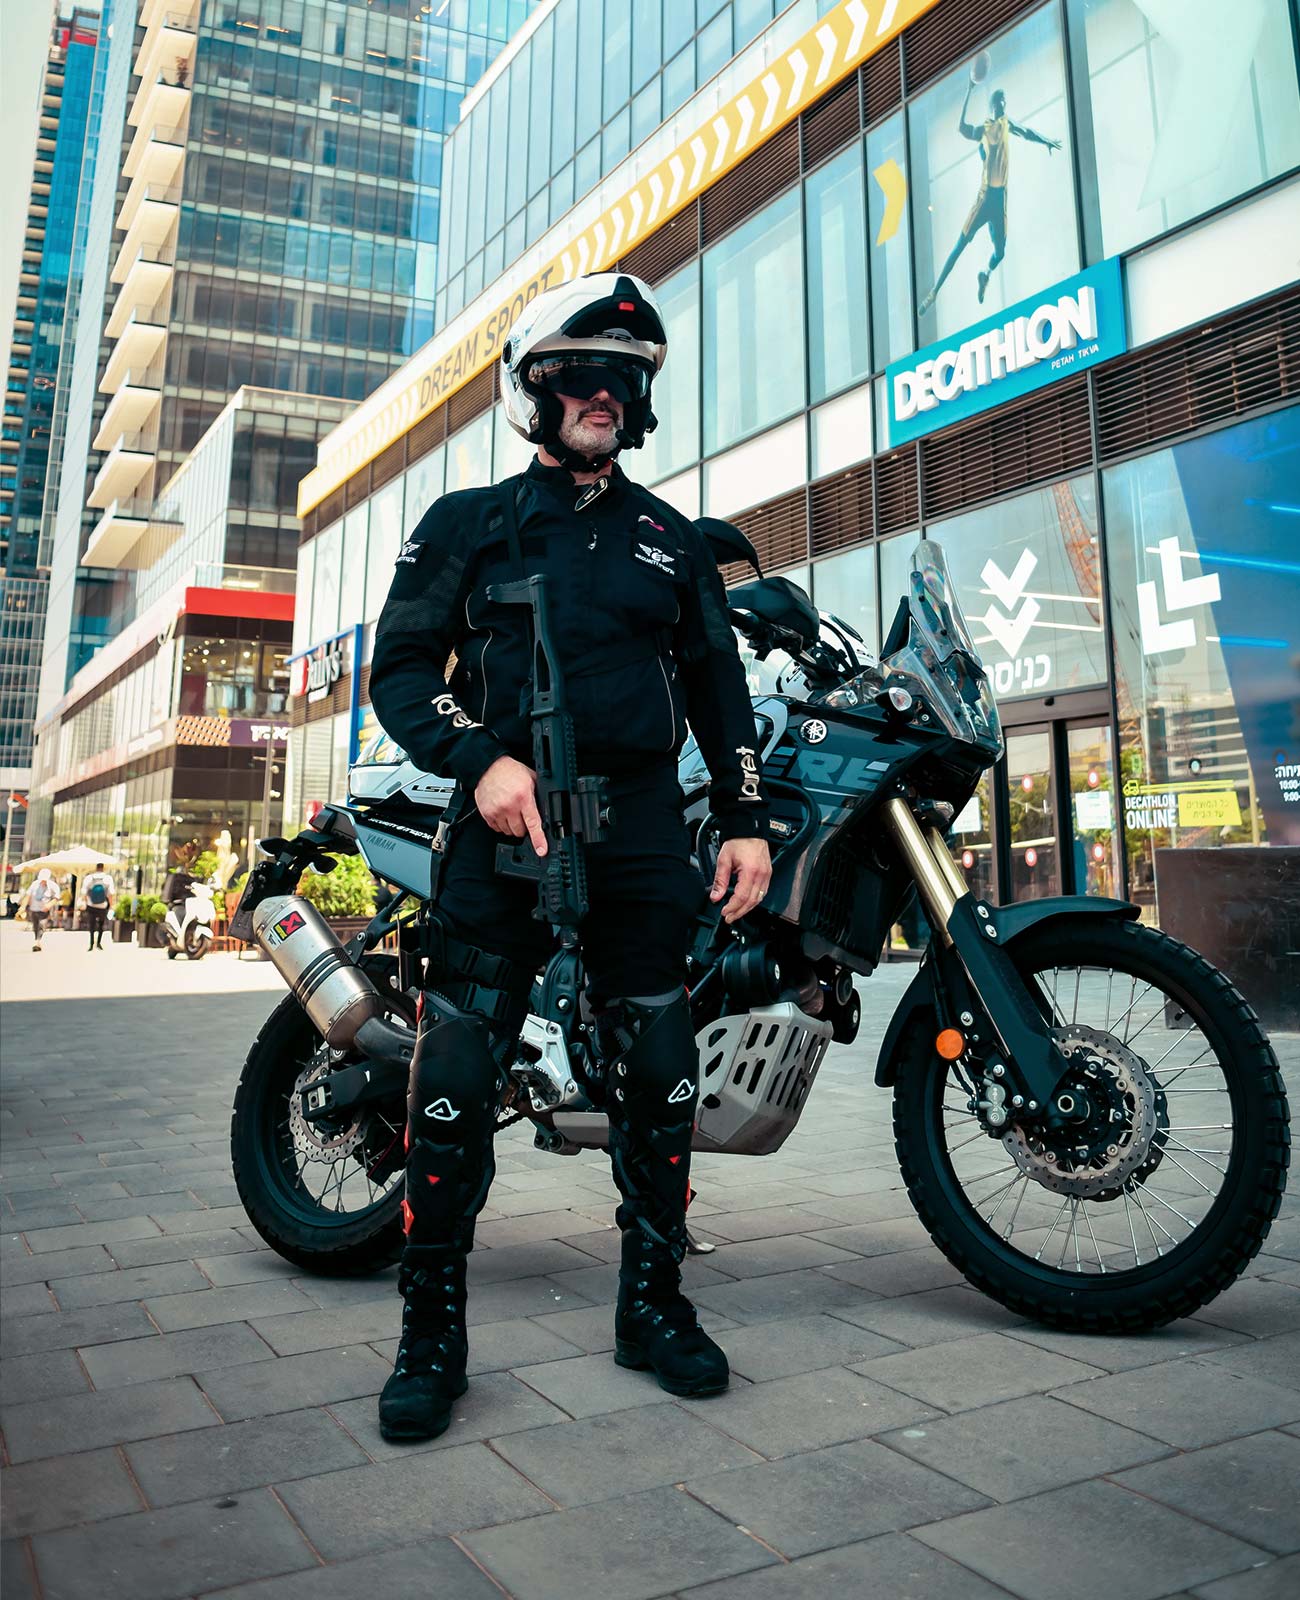 Electra Security member posing in front of a motorcycle